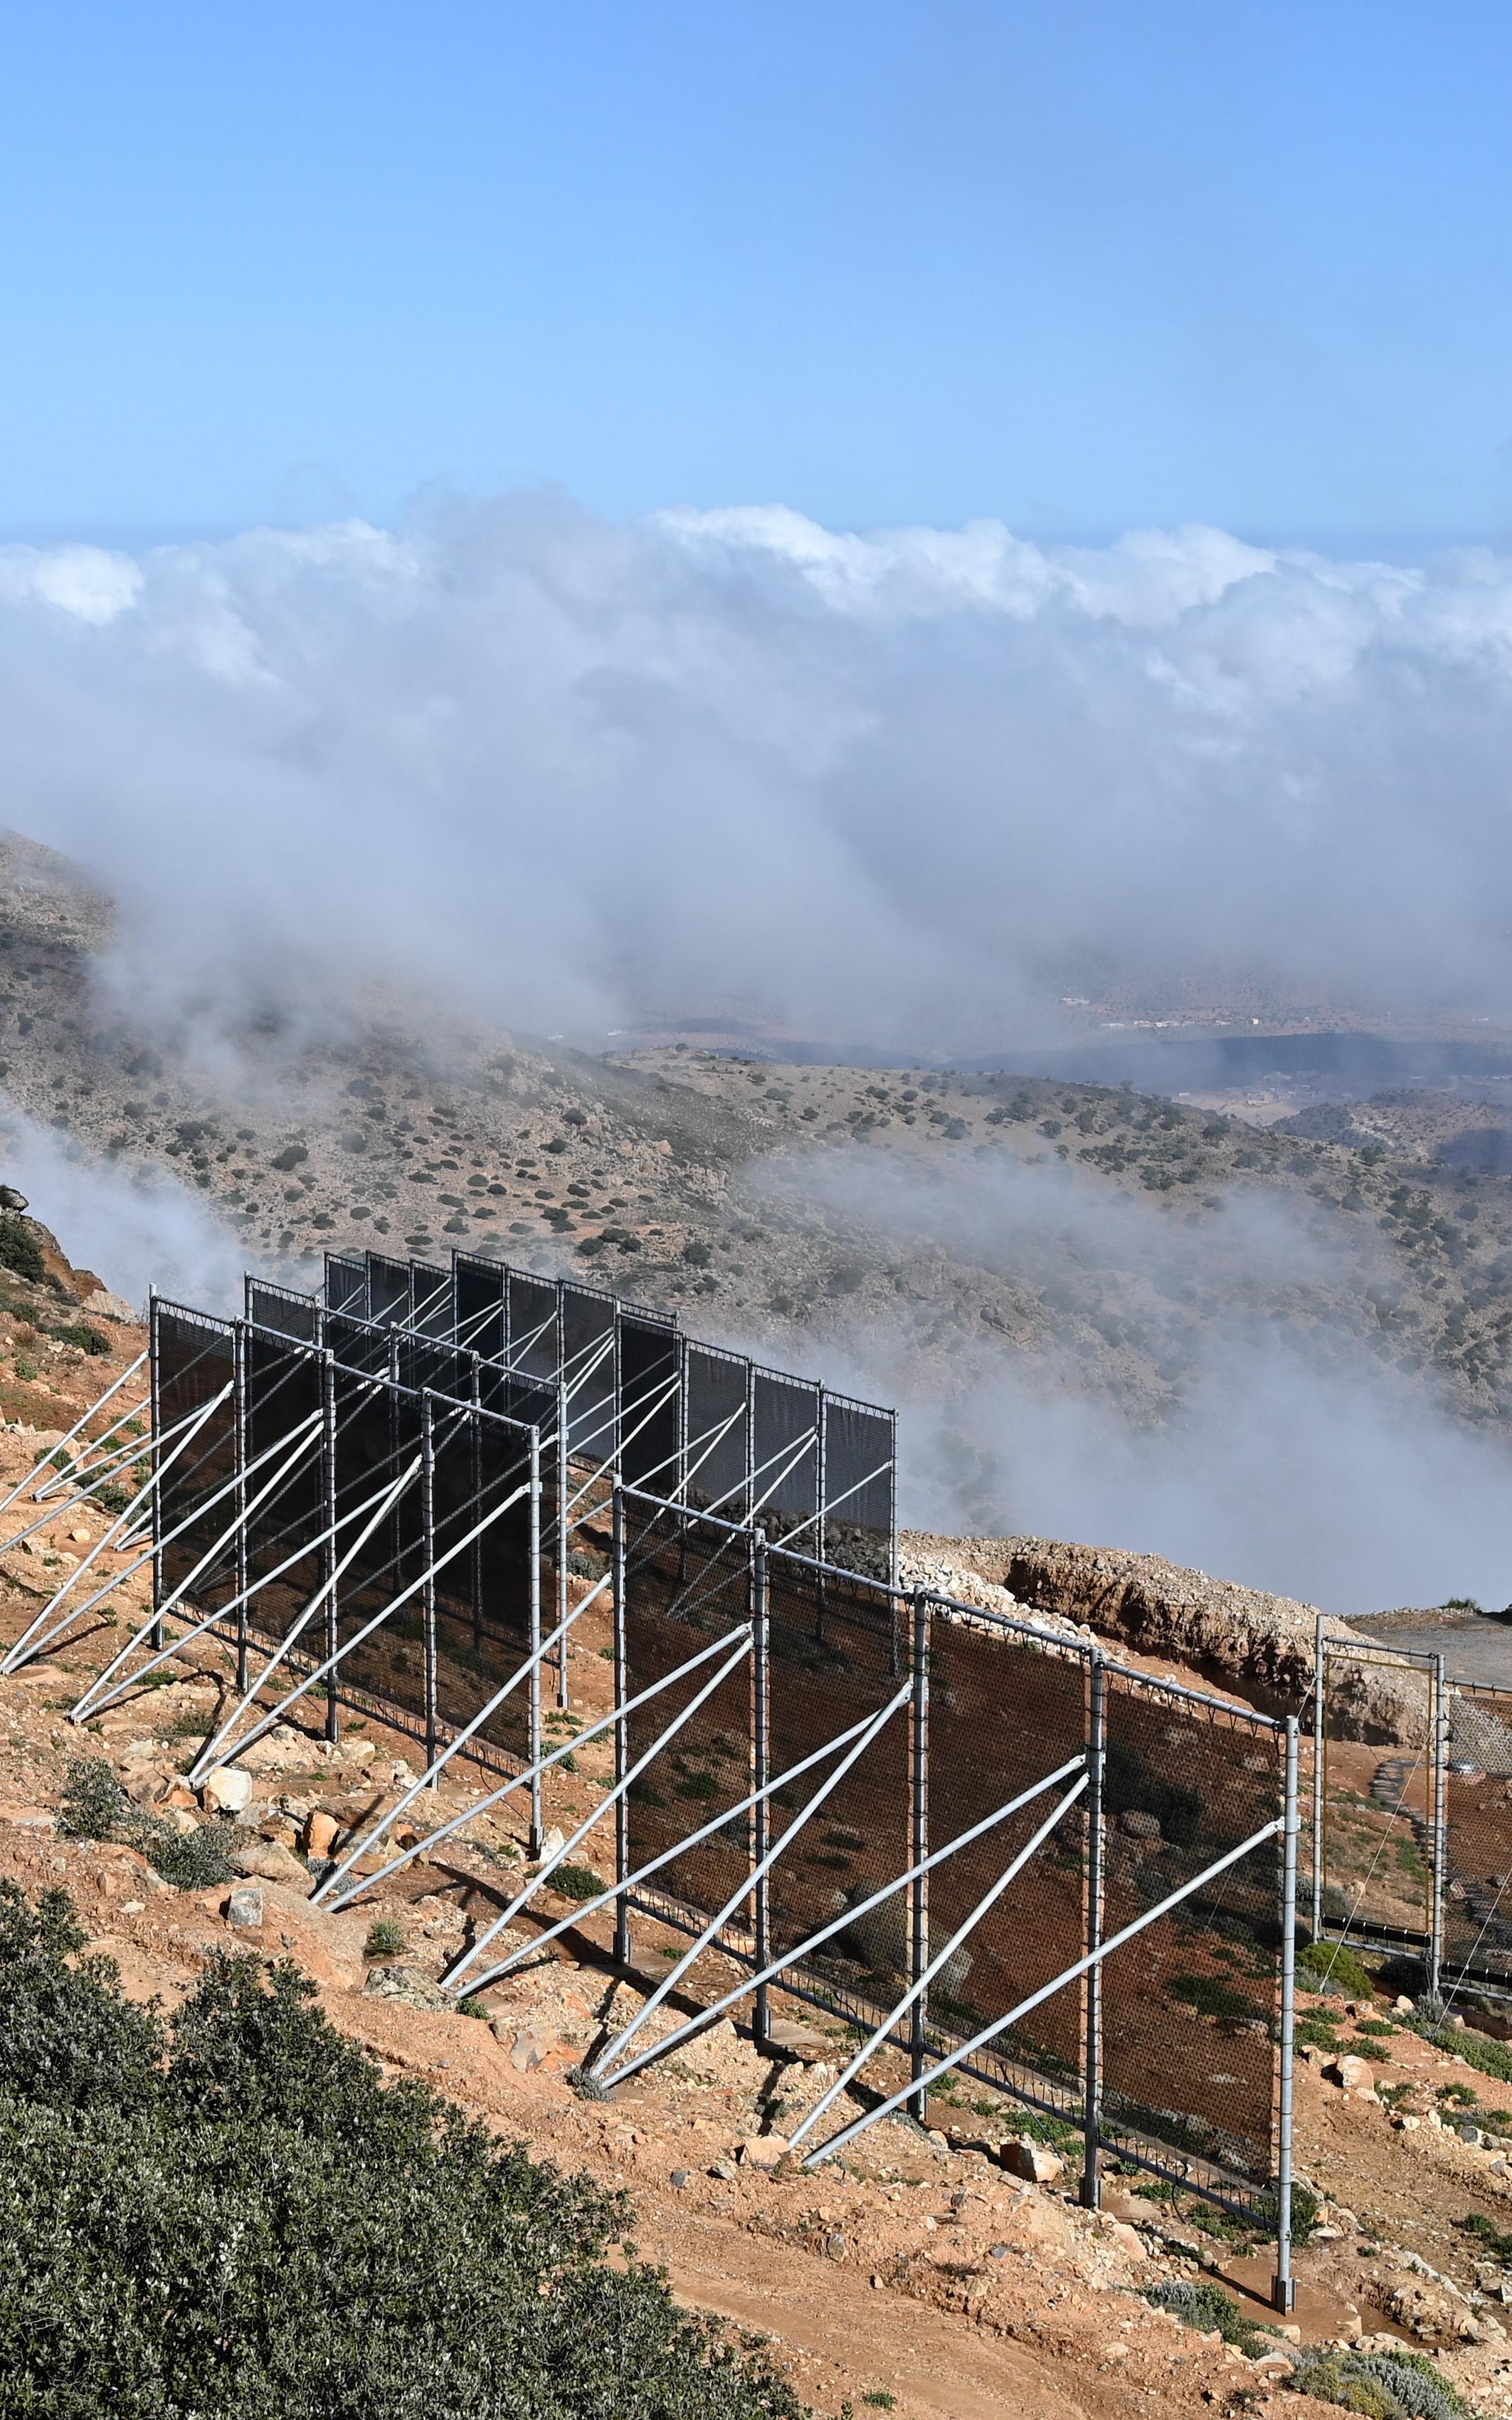 Beautiful News - CloudFisher equipment harvesting water from fog